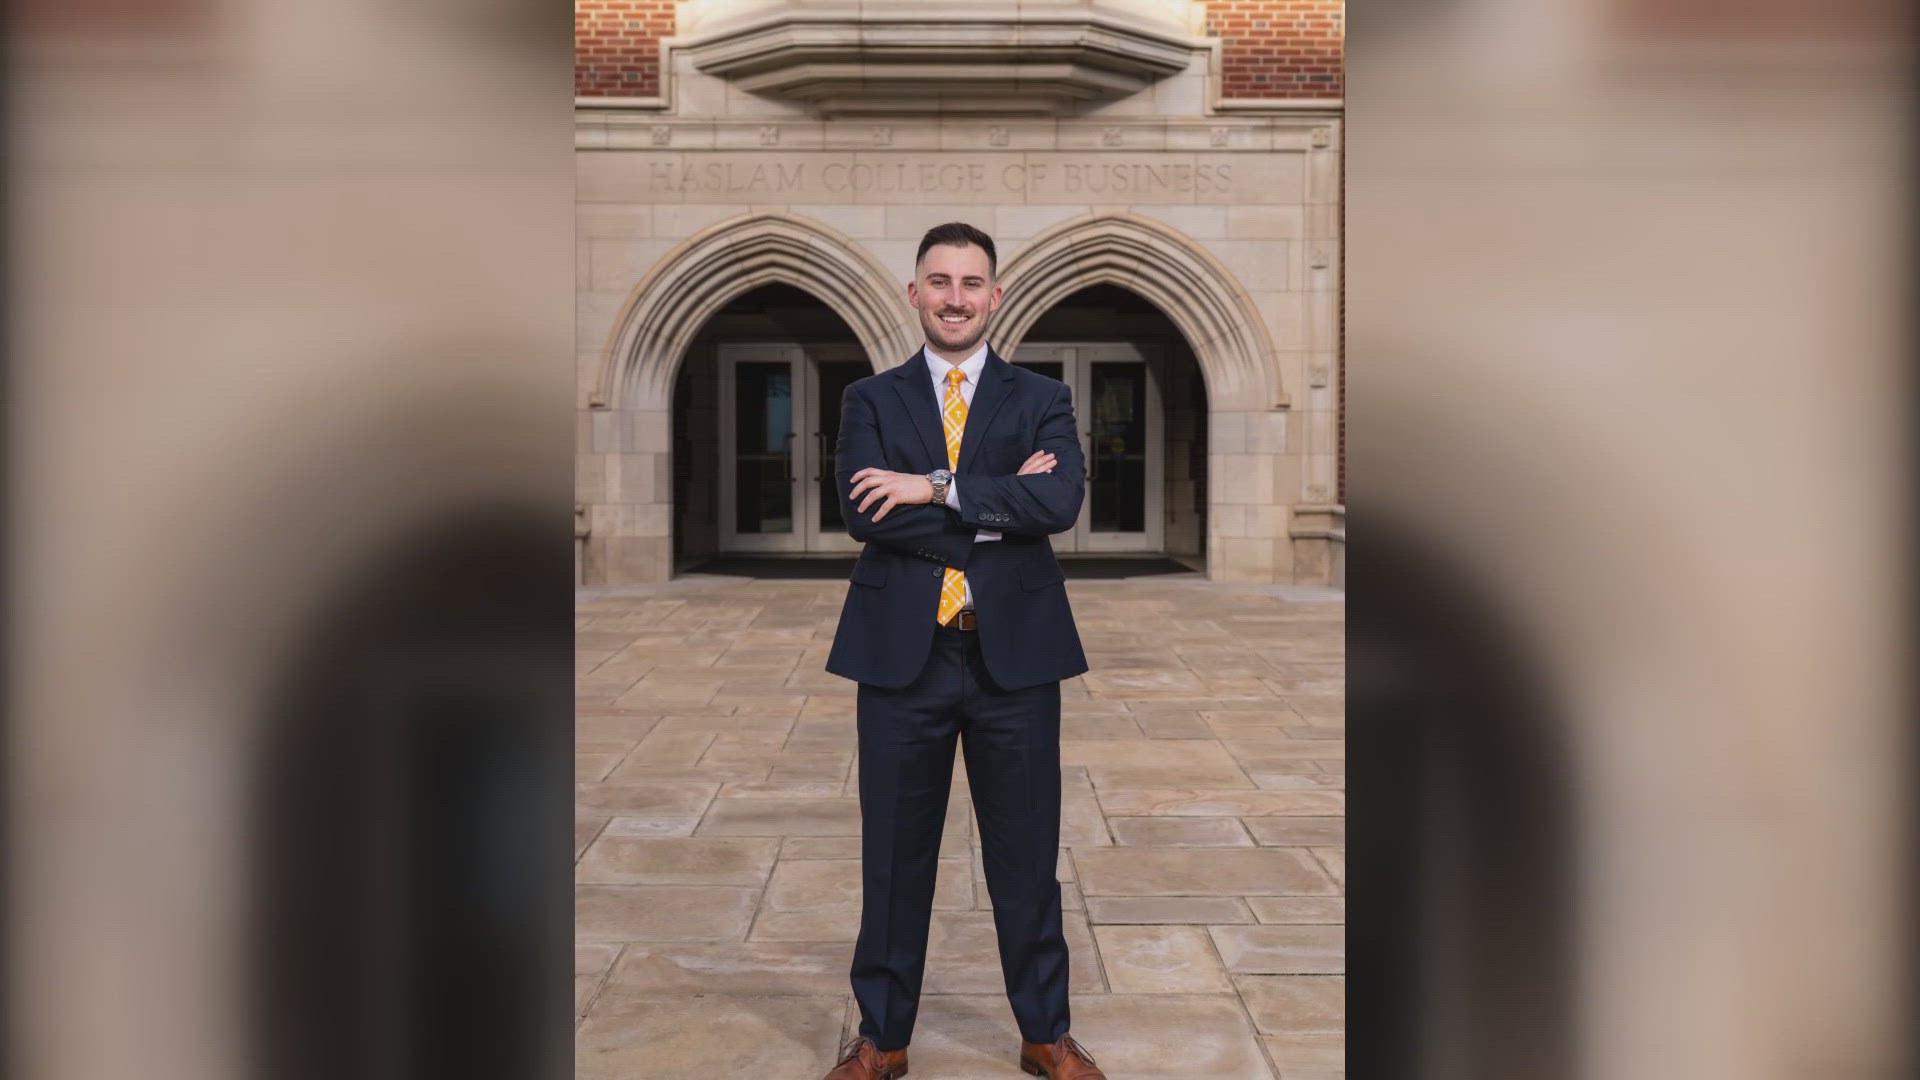 Wiggs is graduating from the Haslam College of Business. After his first year of college, he wanted something more, so he joined the U.S. military.